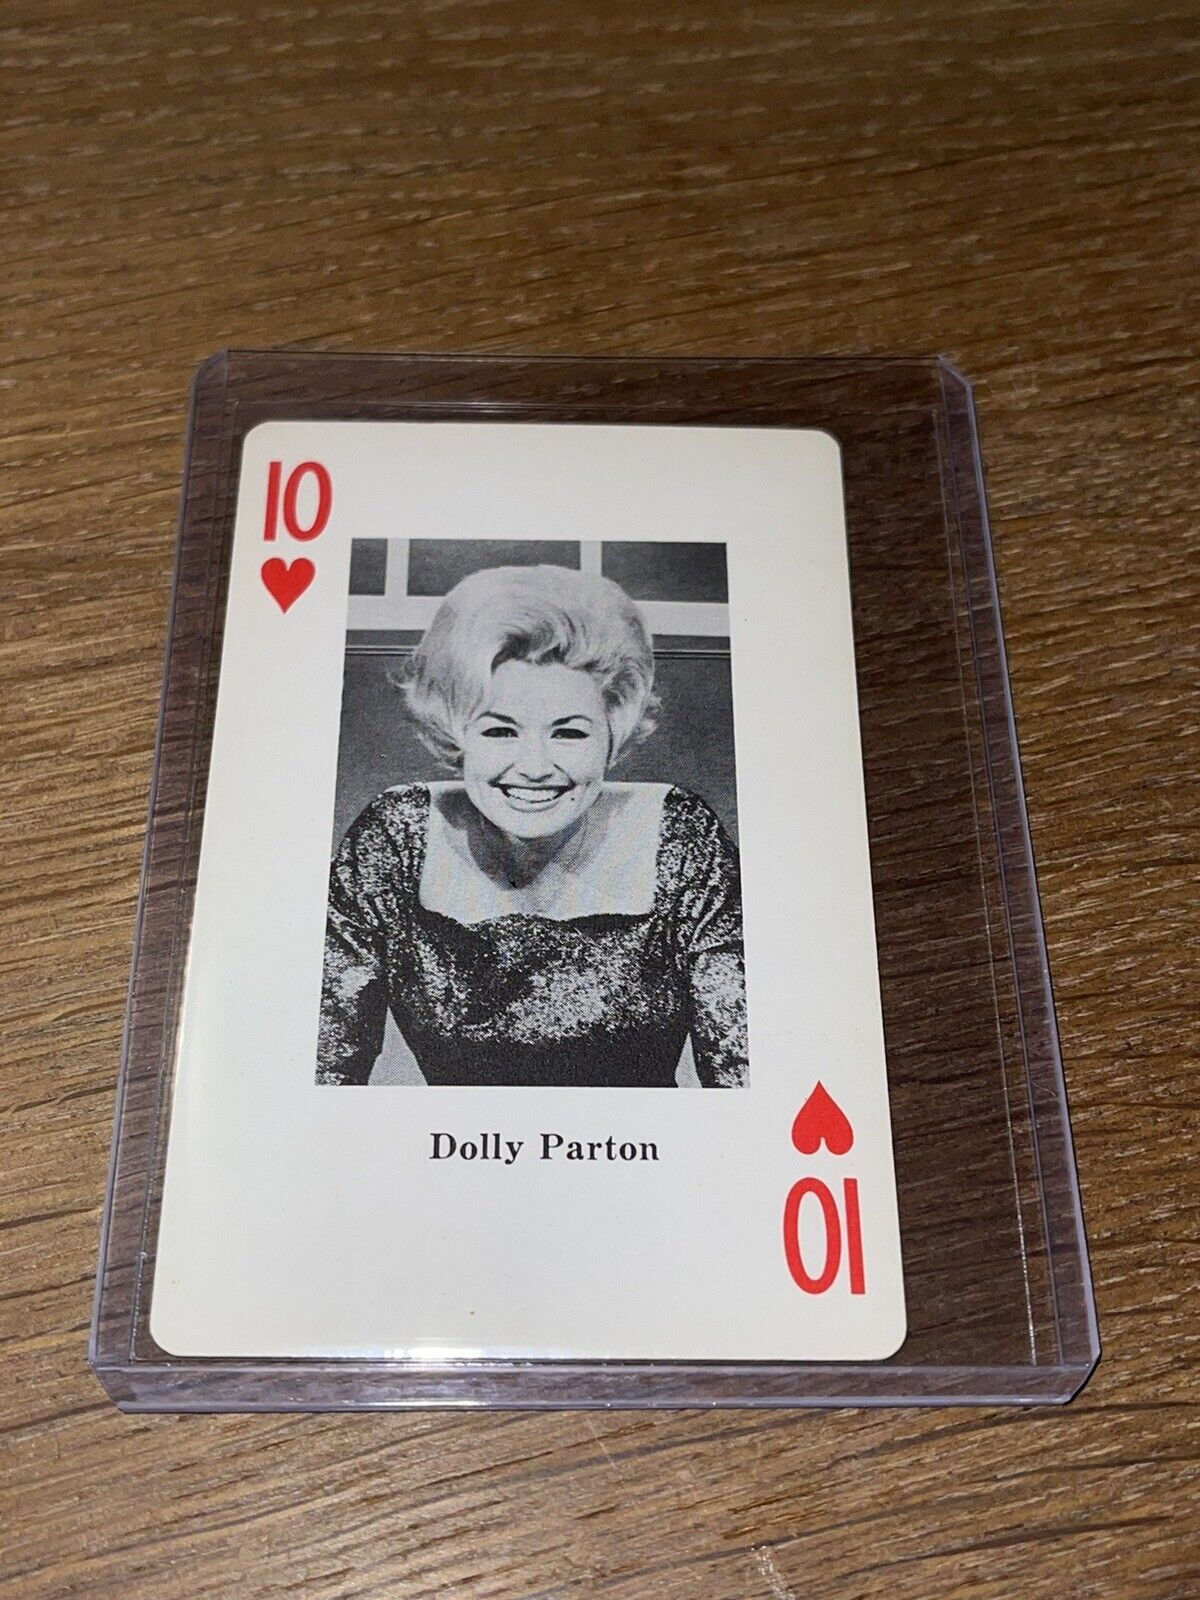 EXTREMELY RARE 1970 HEATHER COUNTRY MUSIC DOLLY PARTON 10 OF HEARTS MUSIC CARD